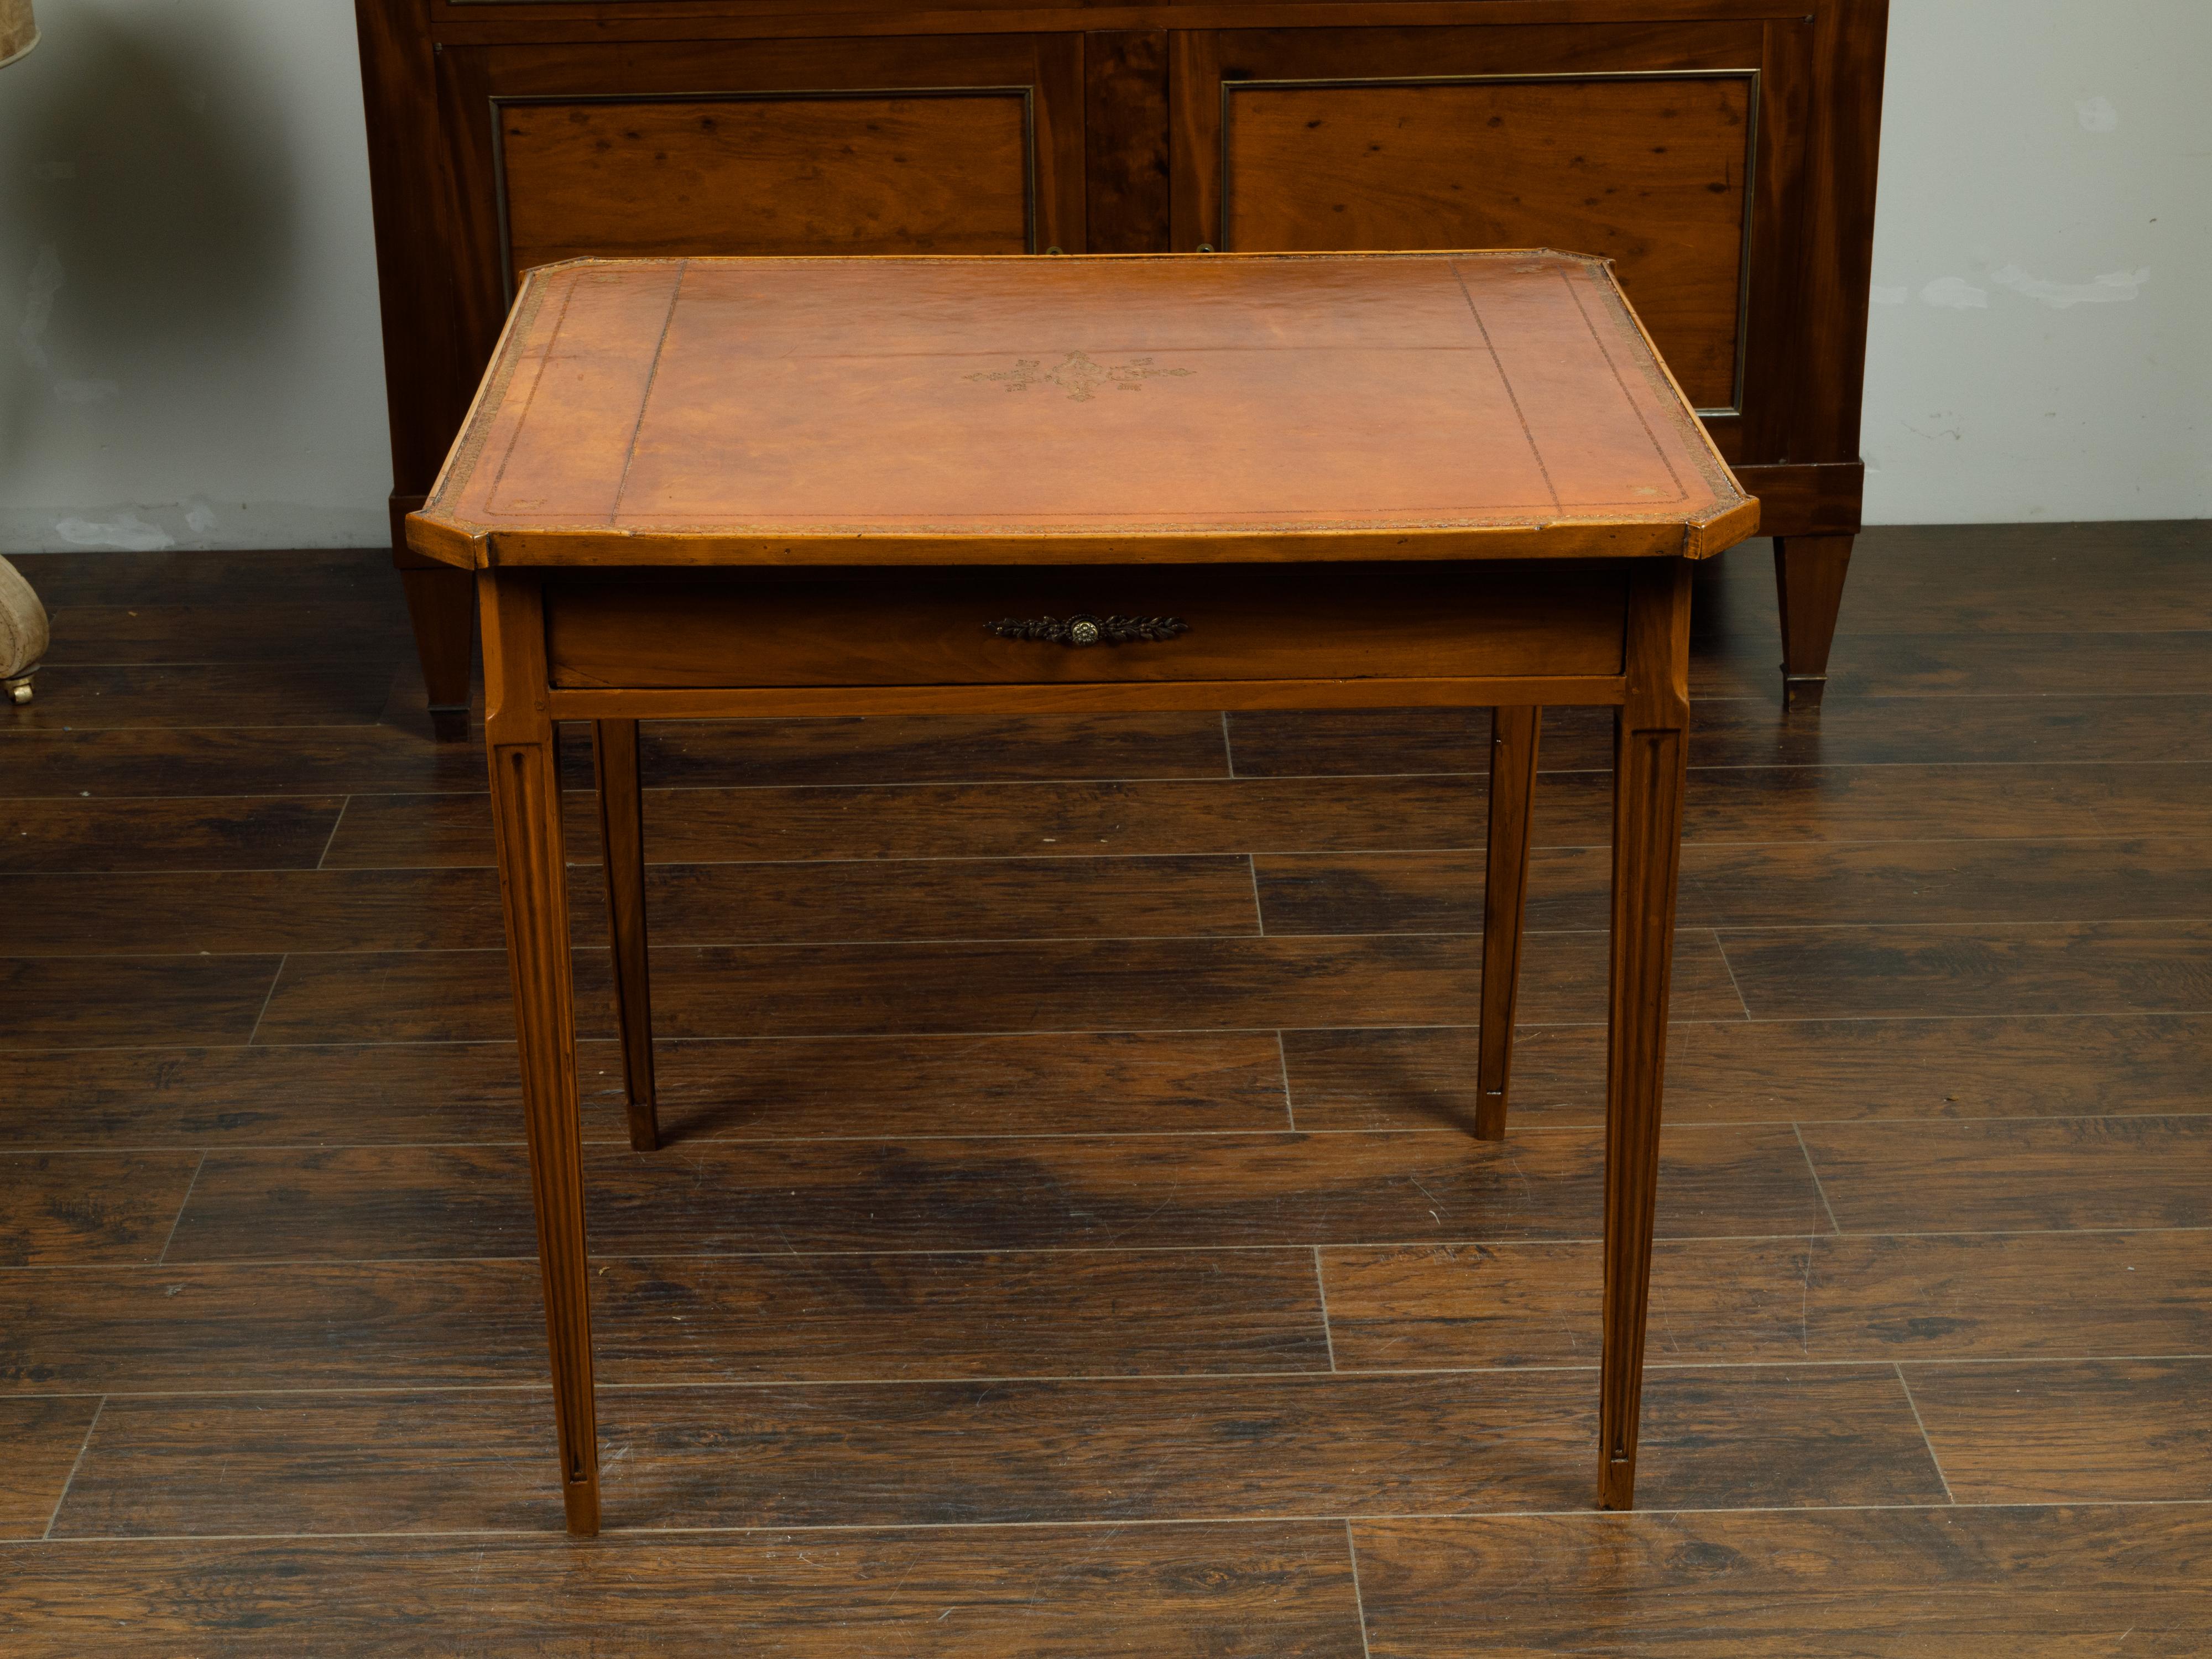 A French walnut side table from the 19th century, with gilt embossed leather top, single drawer and fluted motifs. Created in France during the 19th century, this side table features a rectangular brown leather top with gilt embossed motifs and